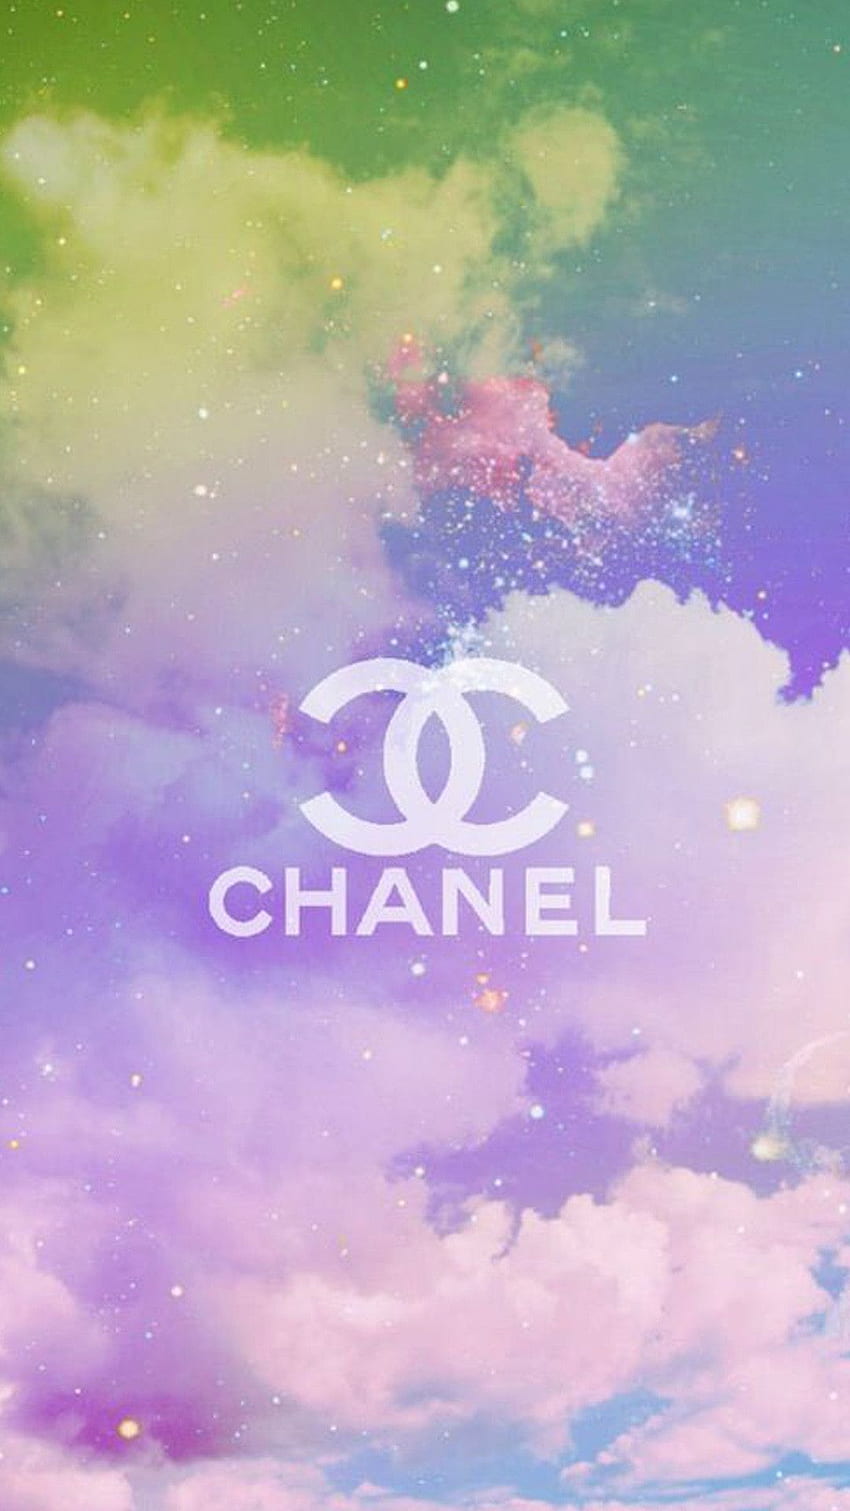 chanel in white background with flowers hd chanel Wallpapers  HD  Wallpapers  ID 42665